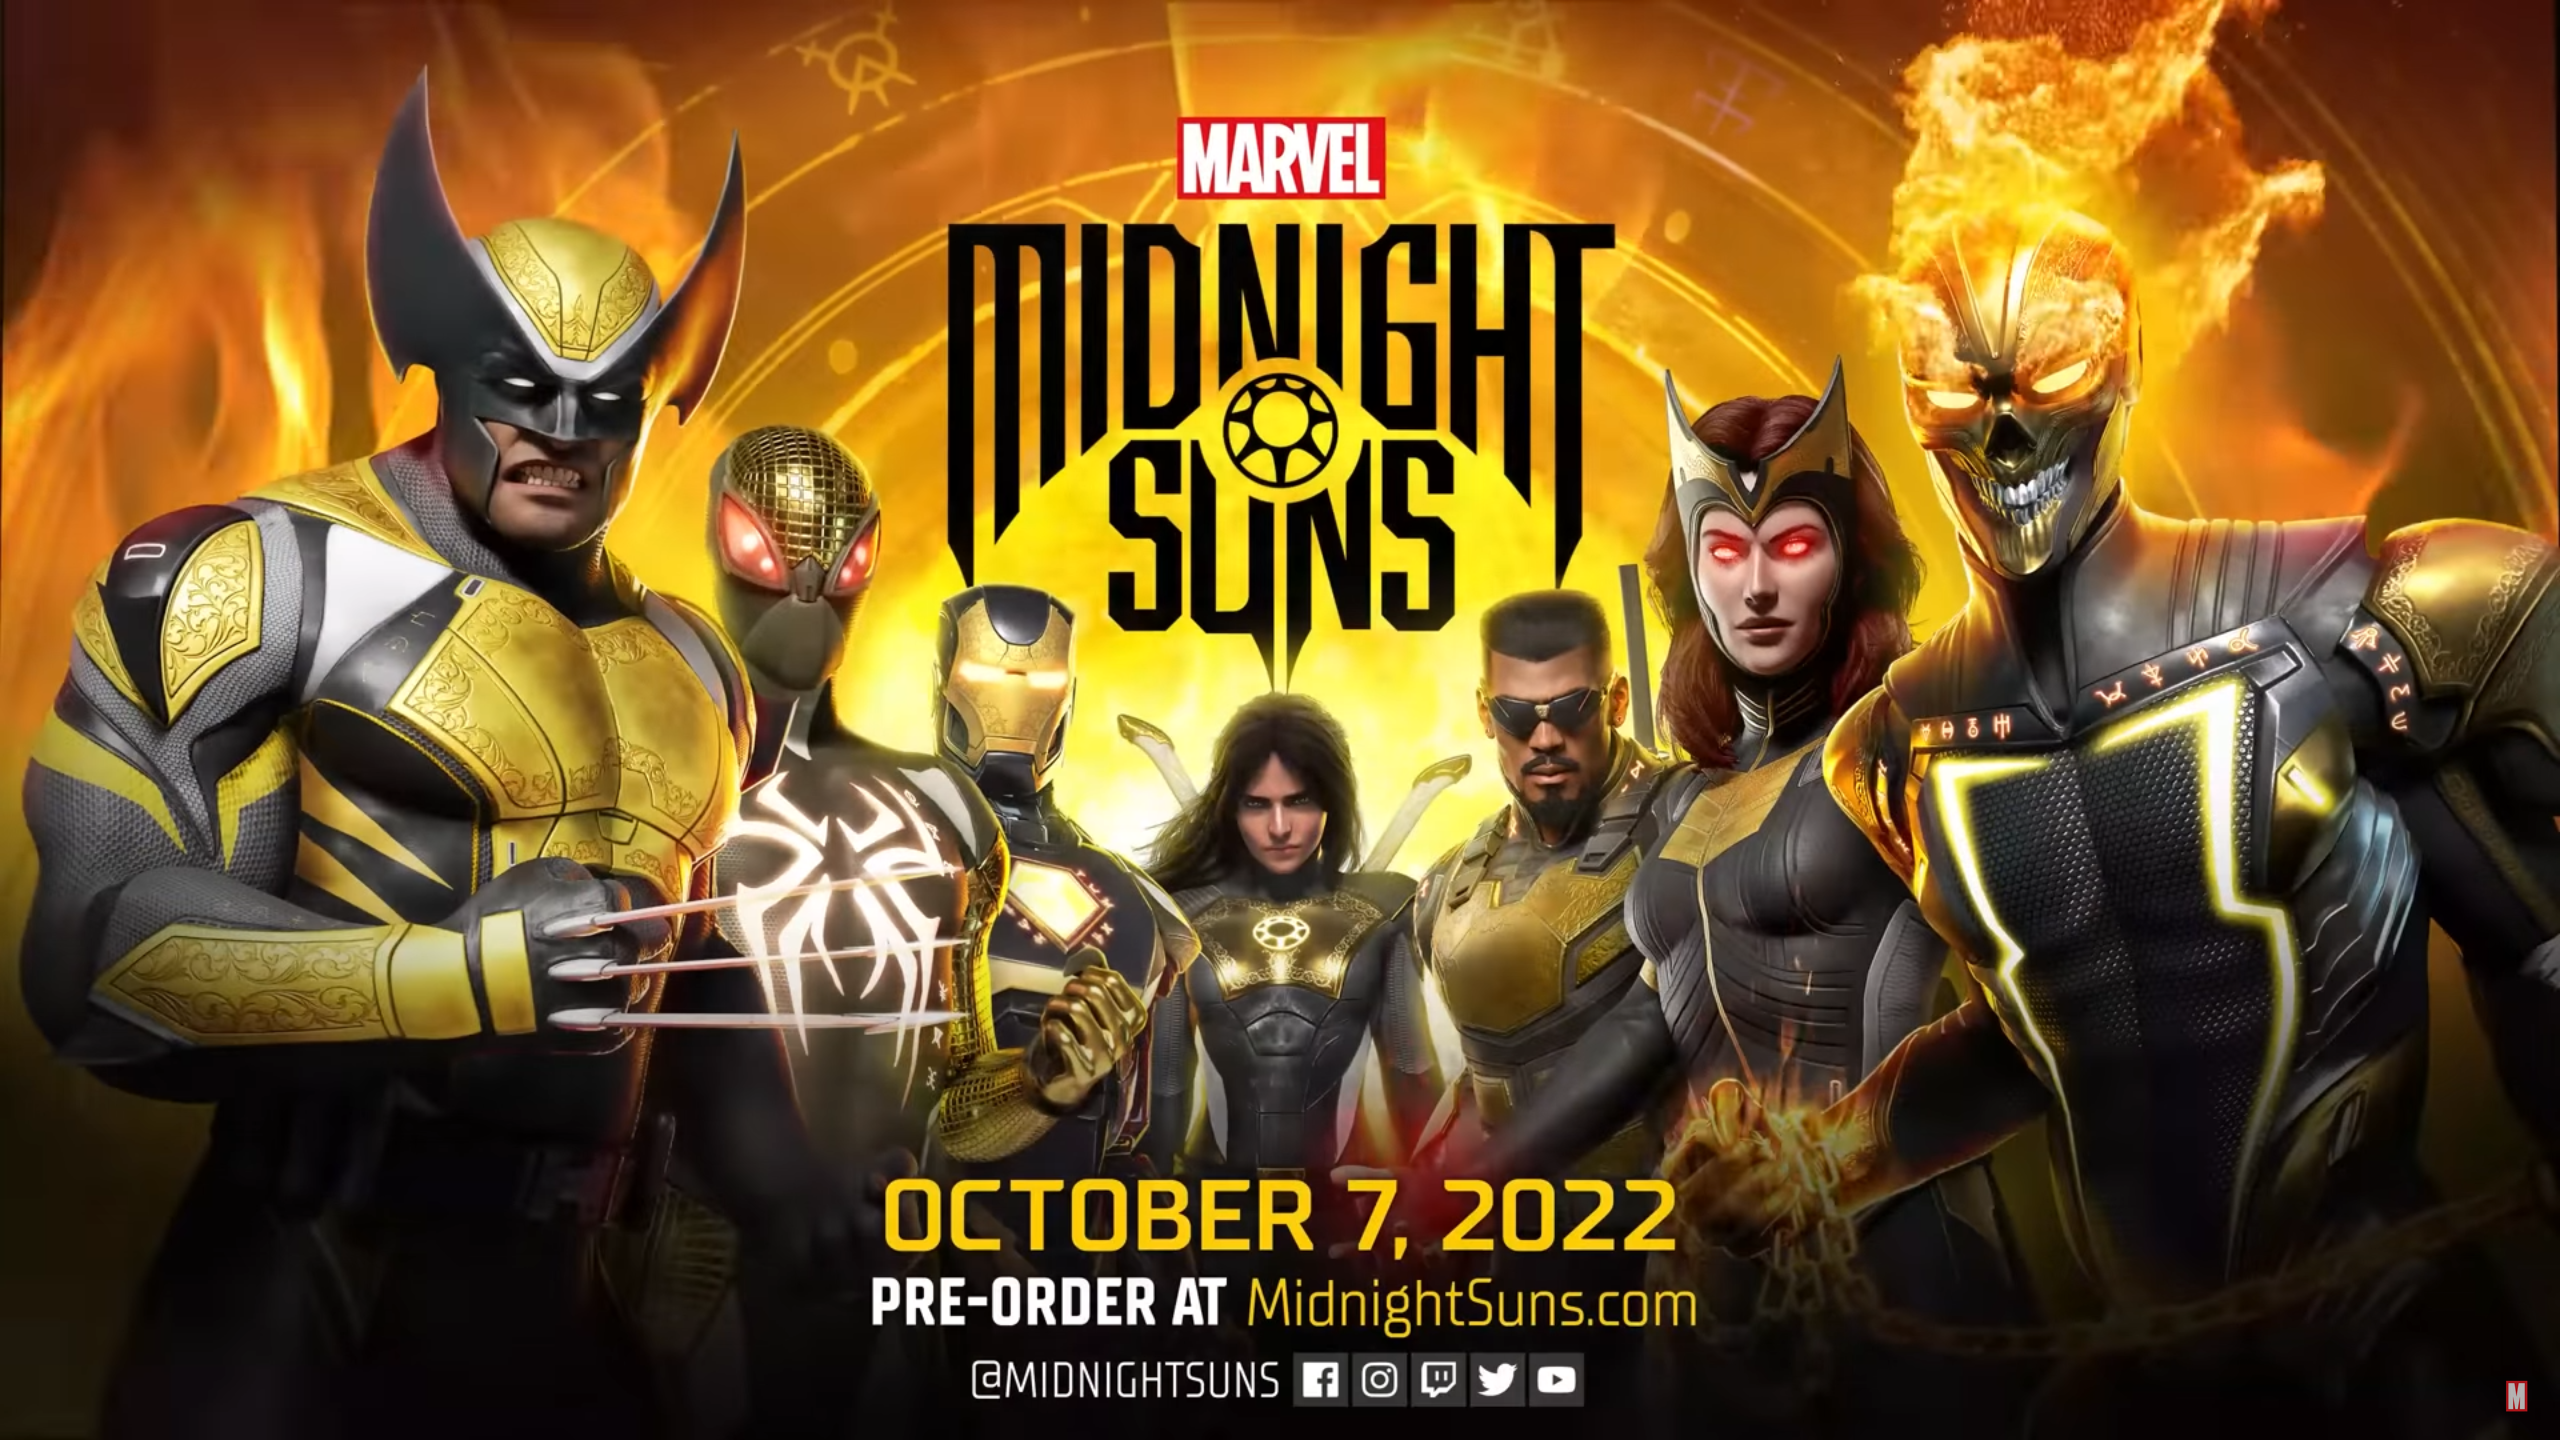 Marvel's Midnight Suns for PS5, Xbox Series, and PC launches